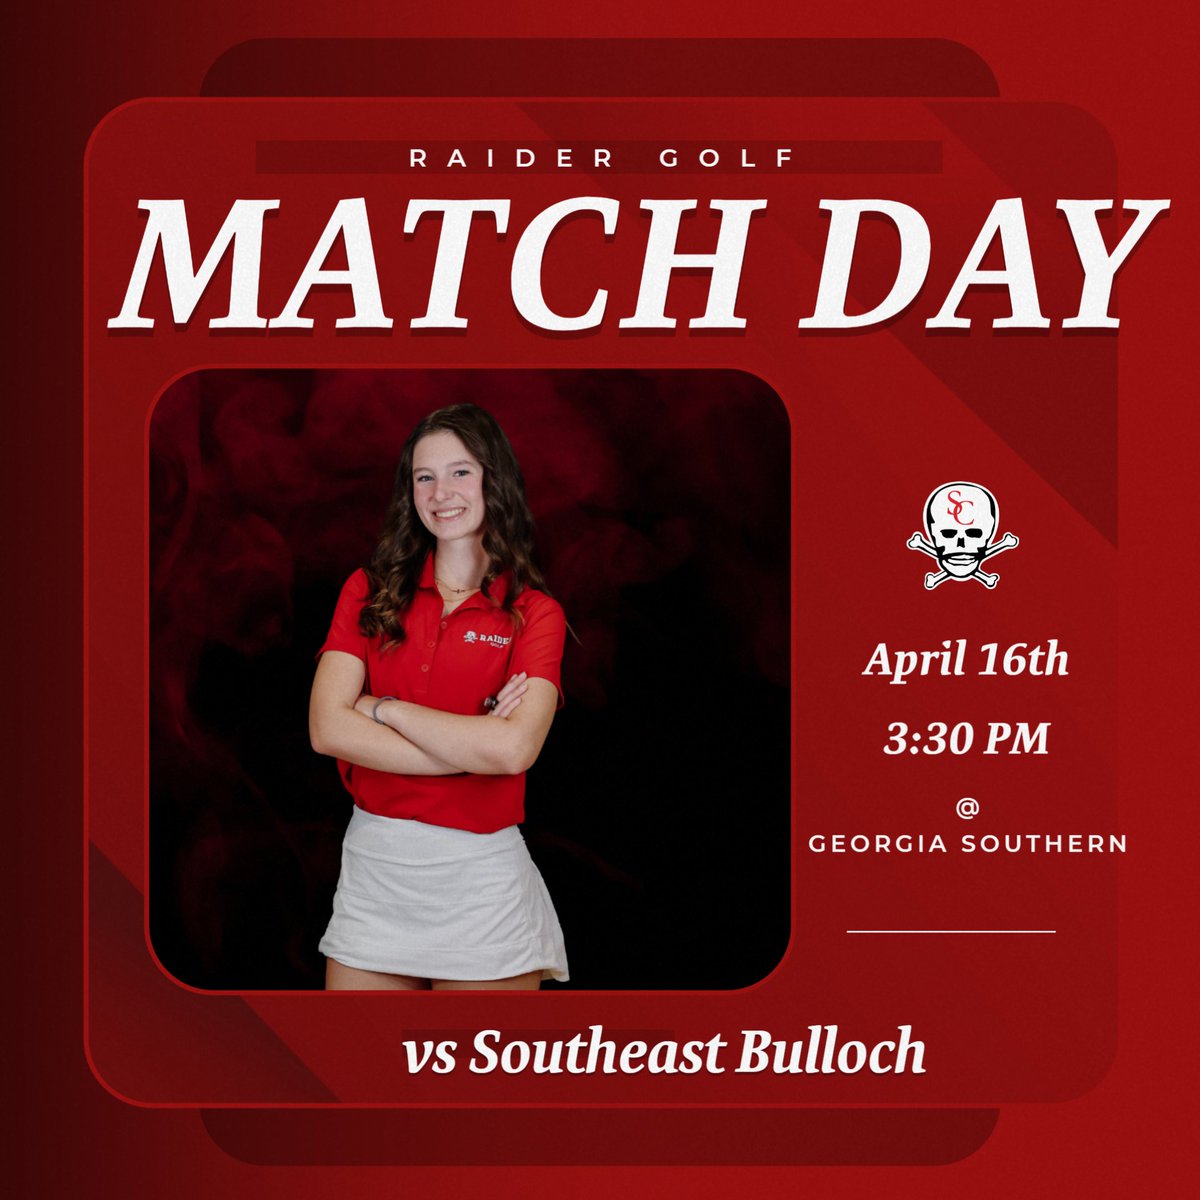 Good luck to the Raider Golf teams as they travel to take on Southeast Bulloch today!